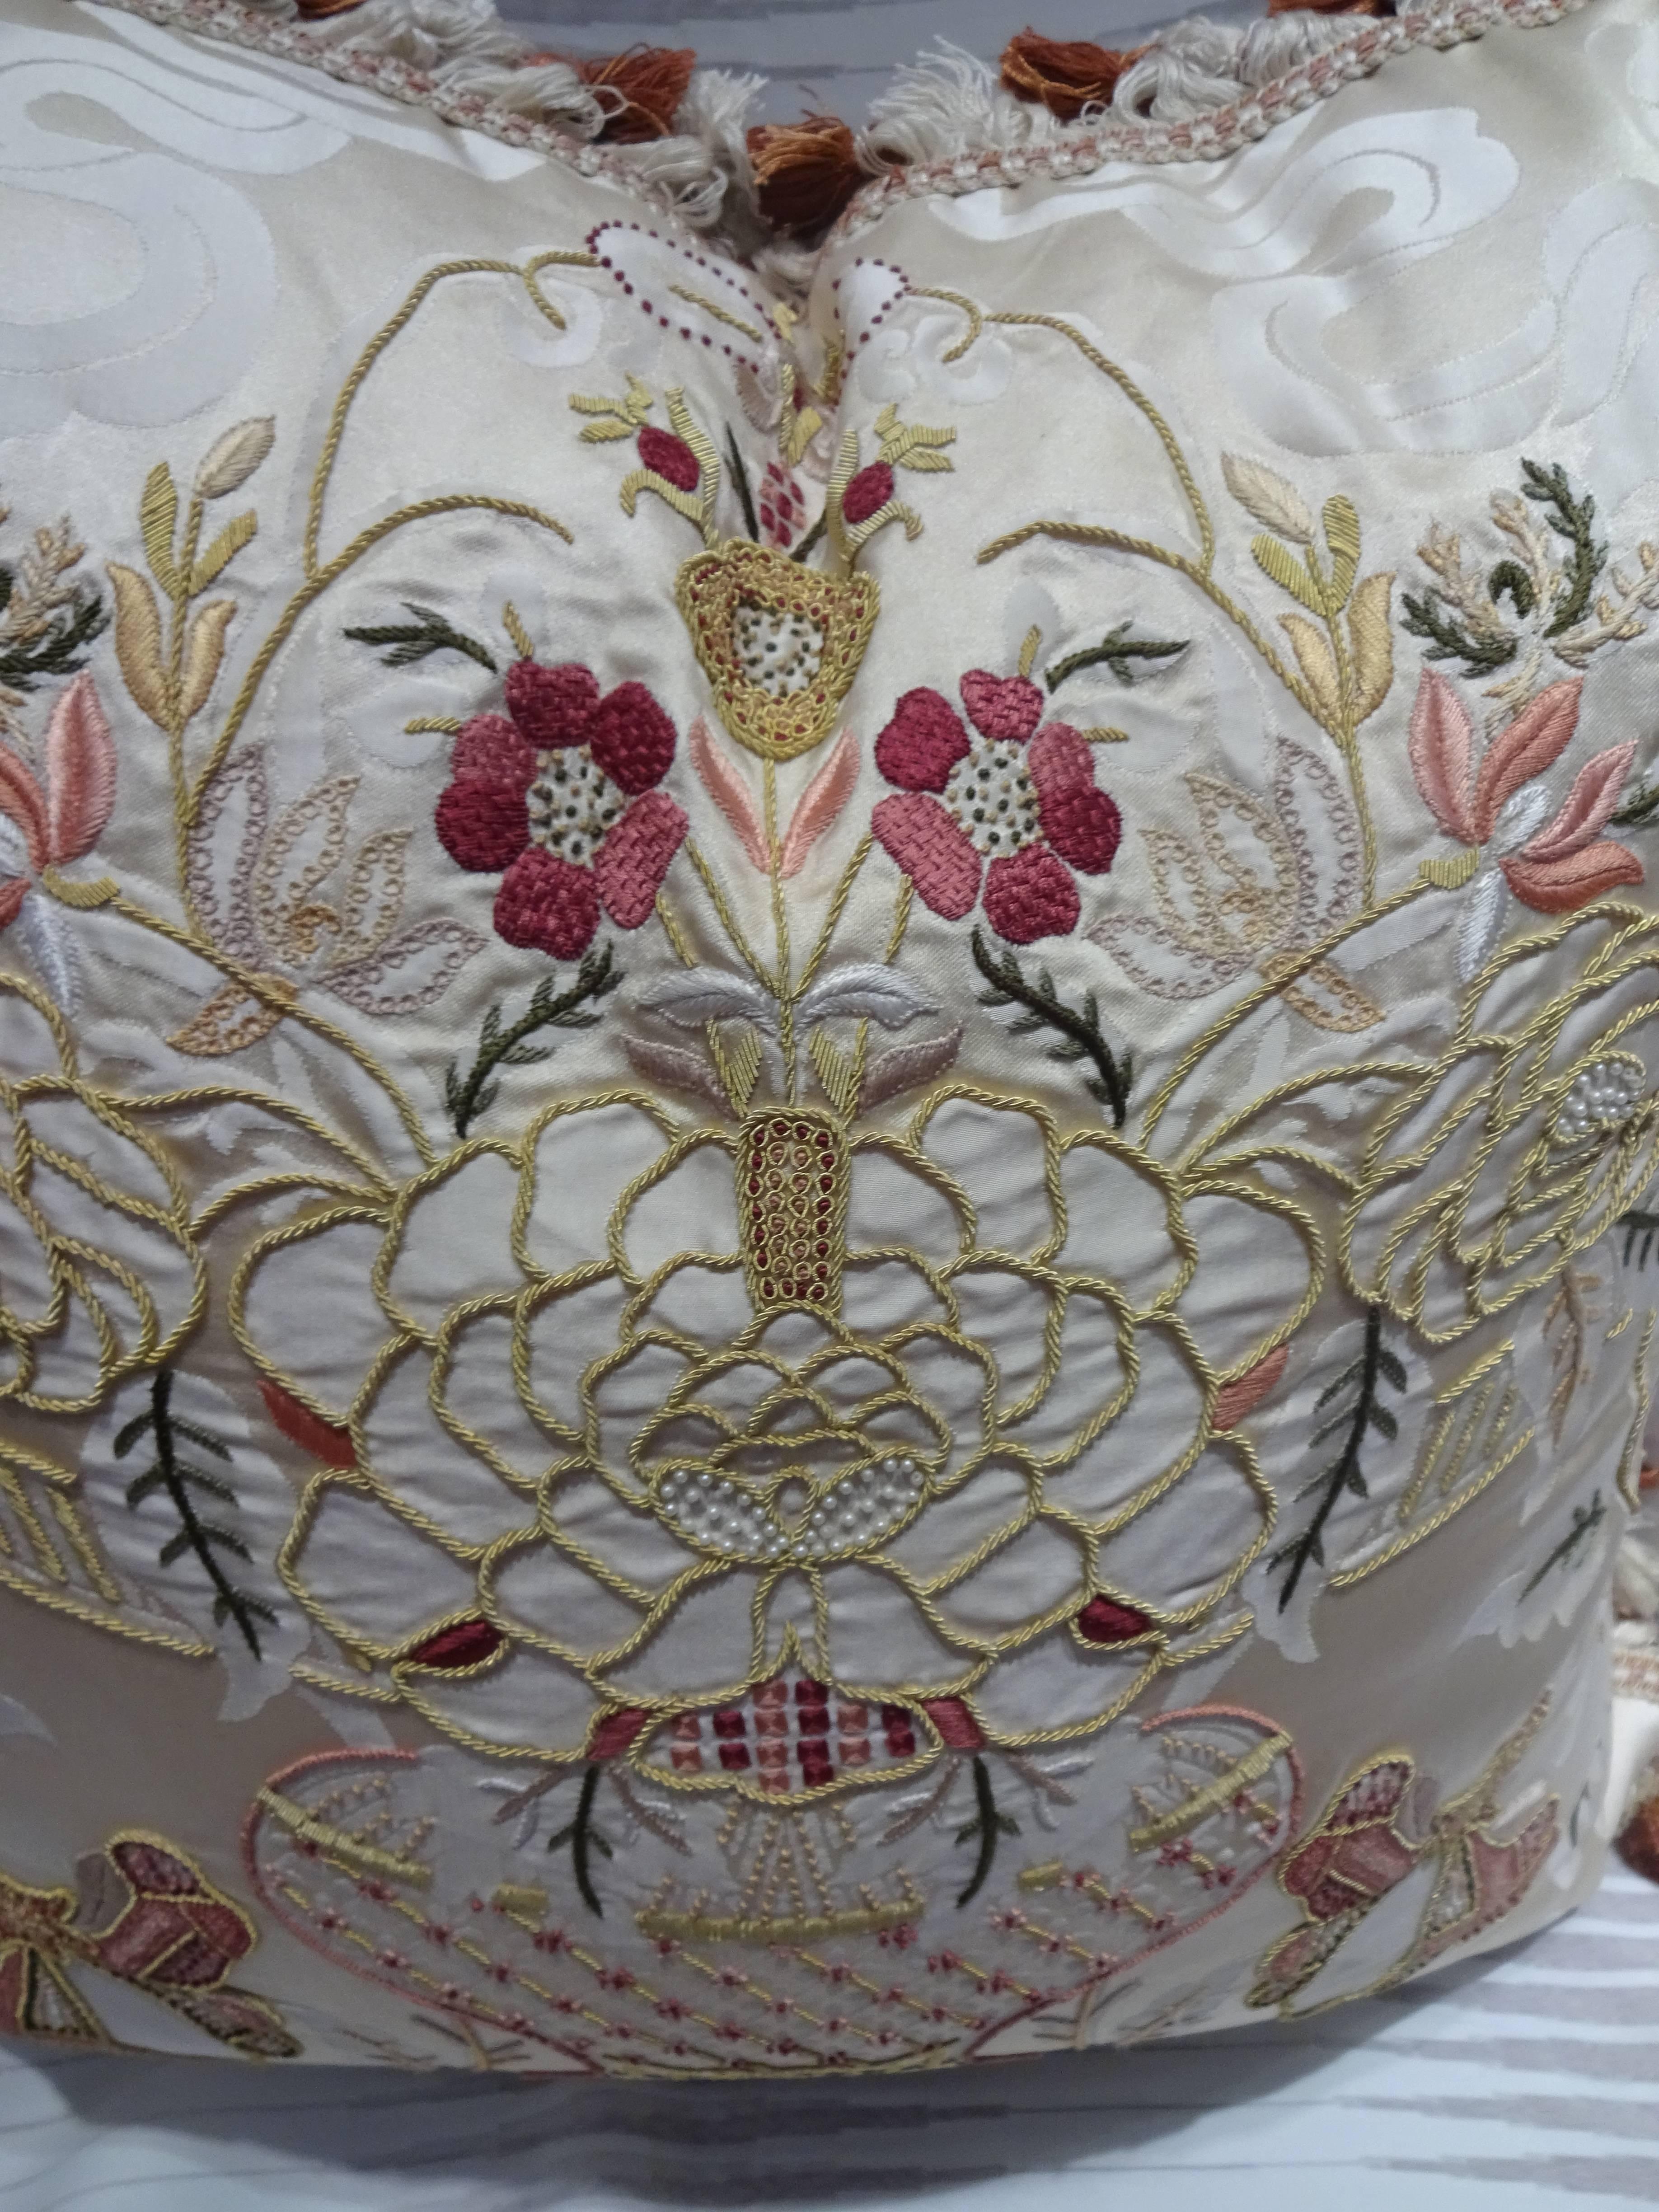 Luxurious embroidered silk pillows, new.
Salamander fabric color cream, gold thread embroidery.
Ribbed silk honey color over backside.
Size: 23